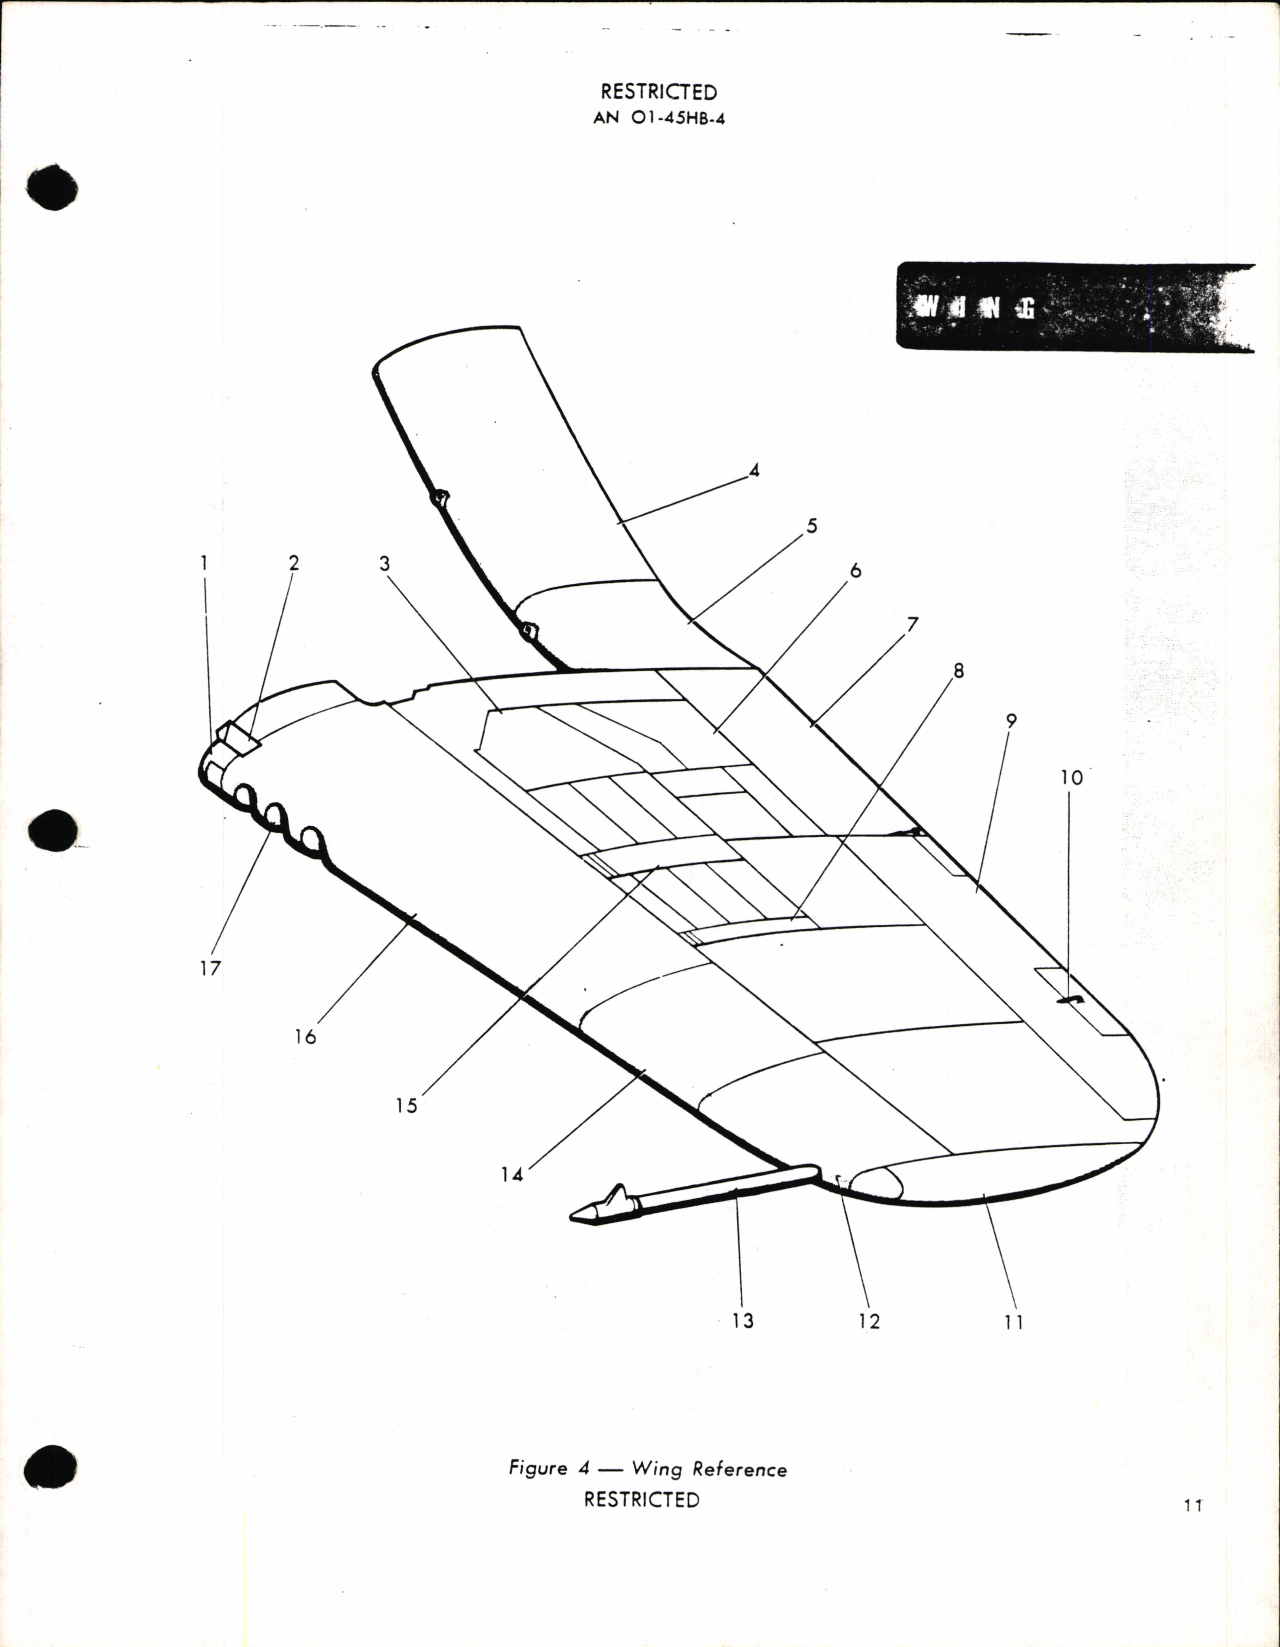 Sample page 19 from AirCorps Library document: Parts Catalog for F4U-4 and F4U-4B Airplanes